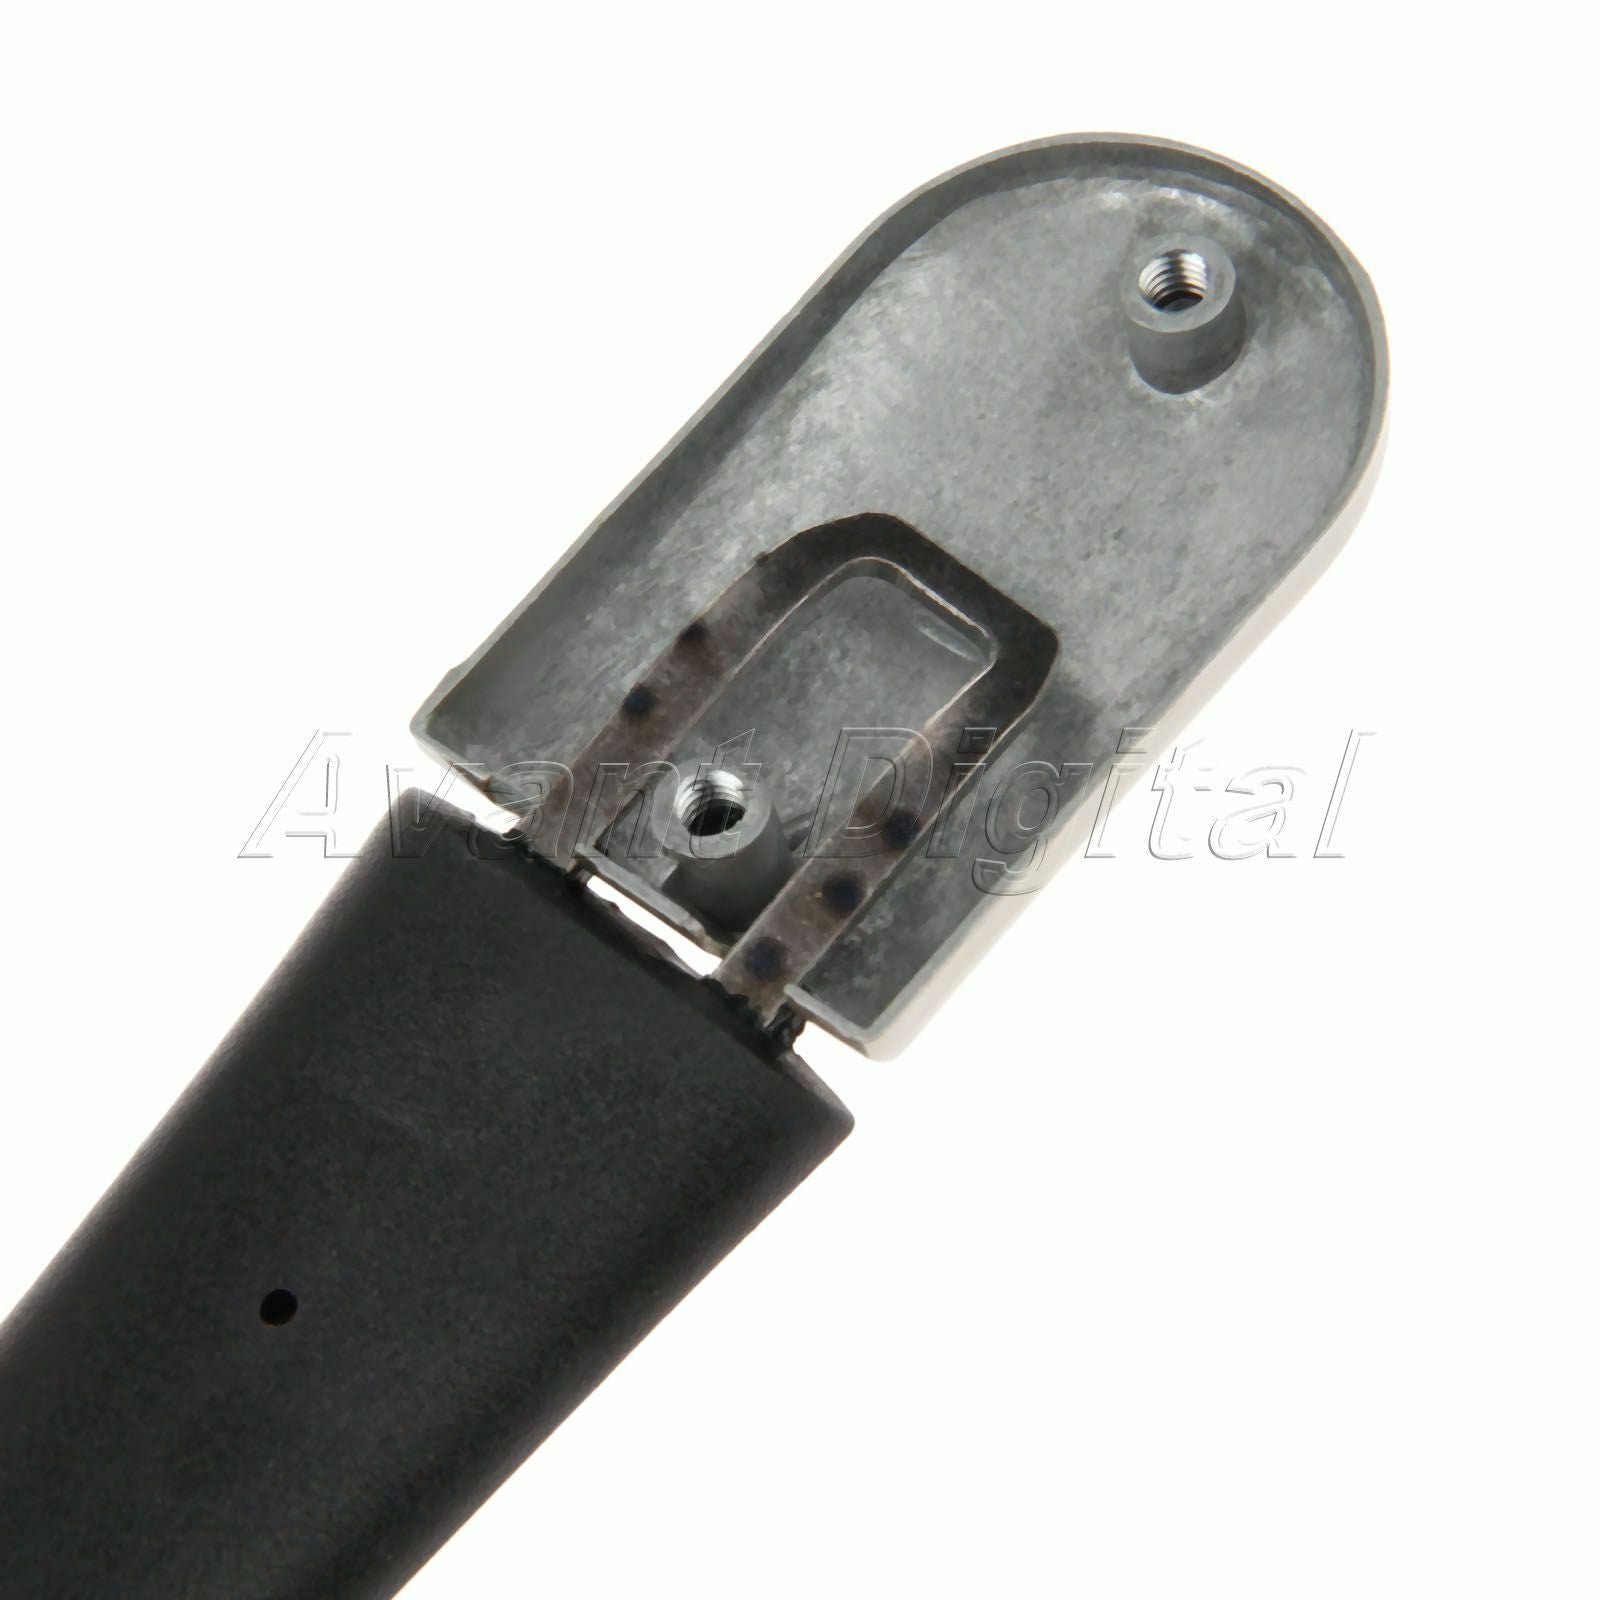 Suitcase Luggage Case Handle Spare Strap Handle Grip PullReplacement Part 1pc